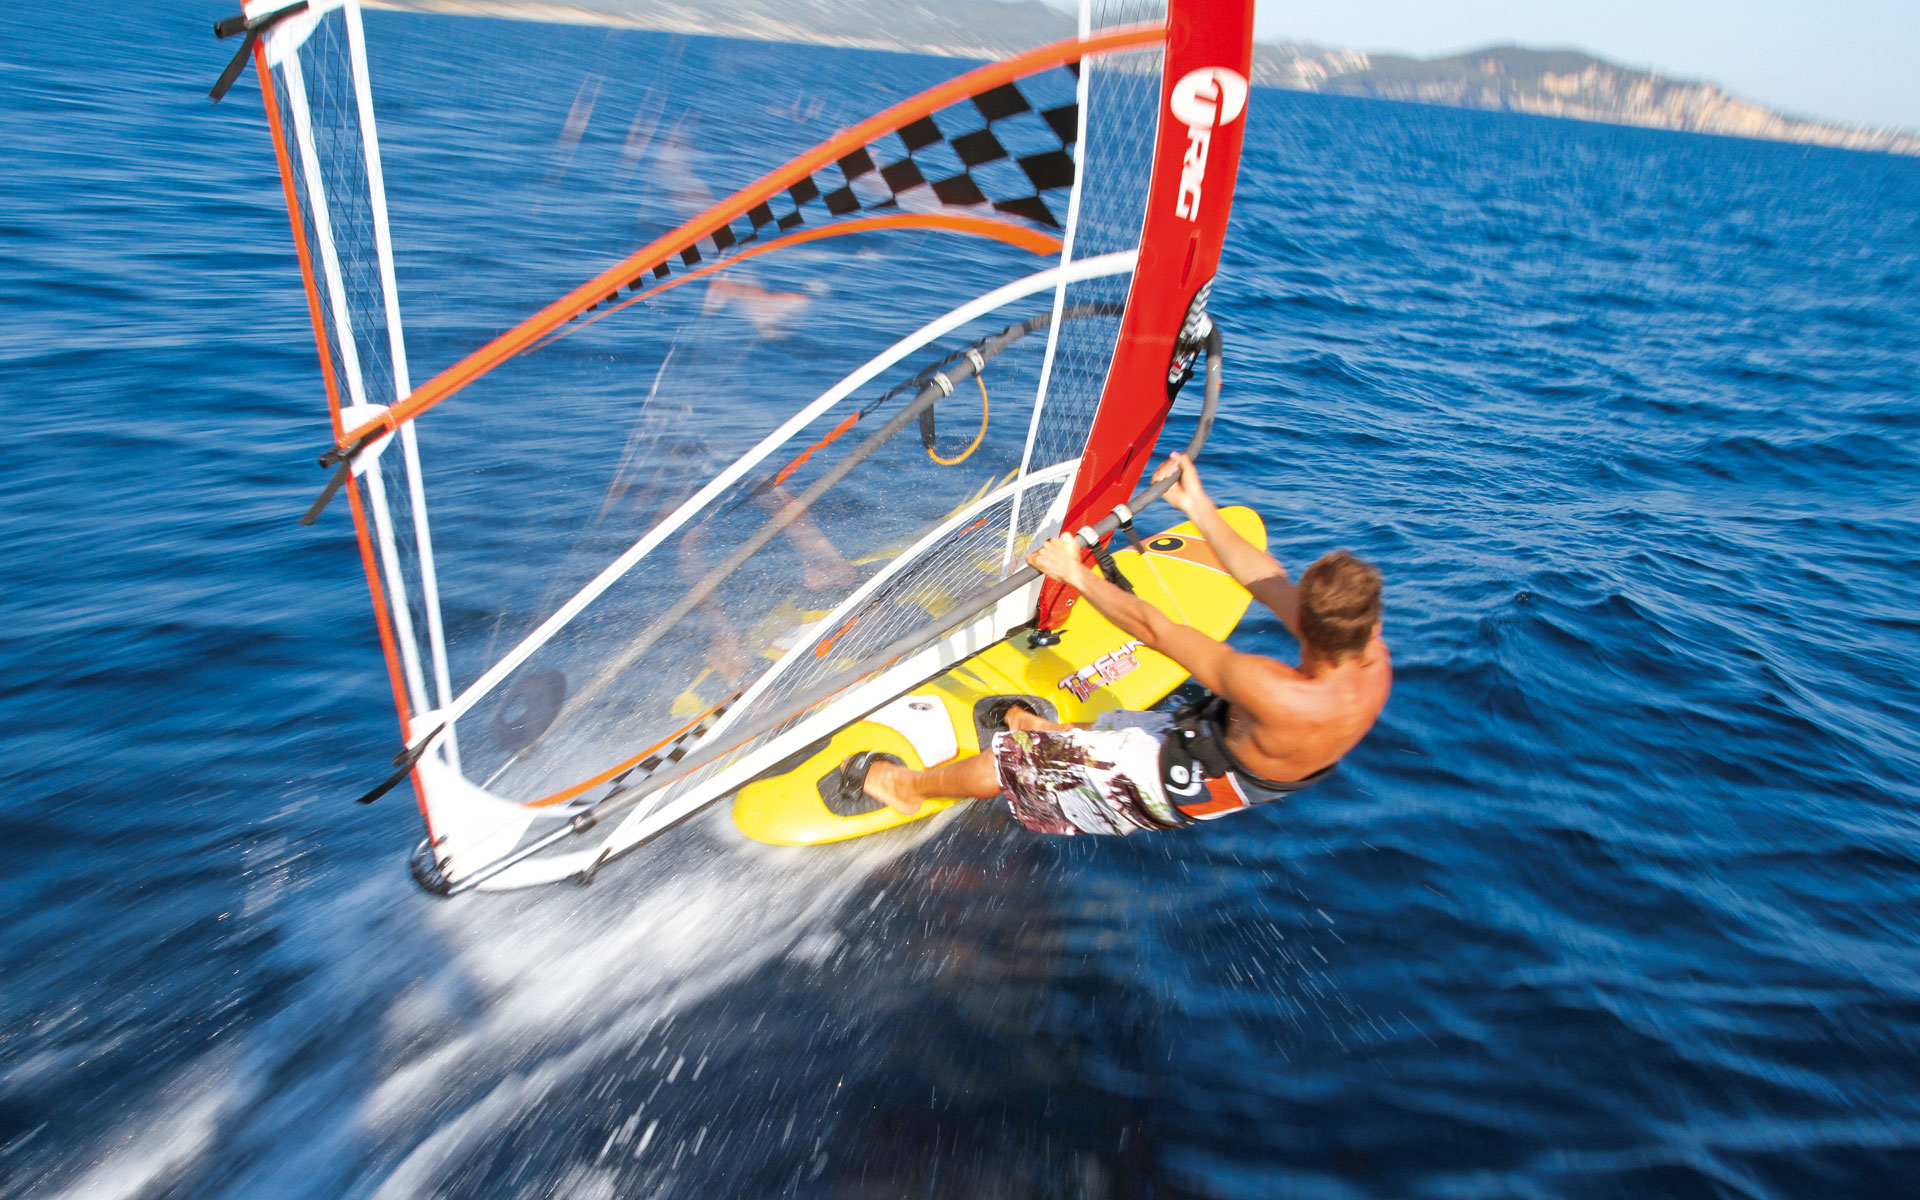 Top Rated Latest Windsurfing Pics - Planche A Voile Hd , HD Wallpaper & Backgrounds